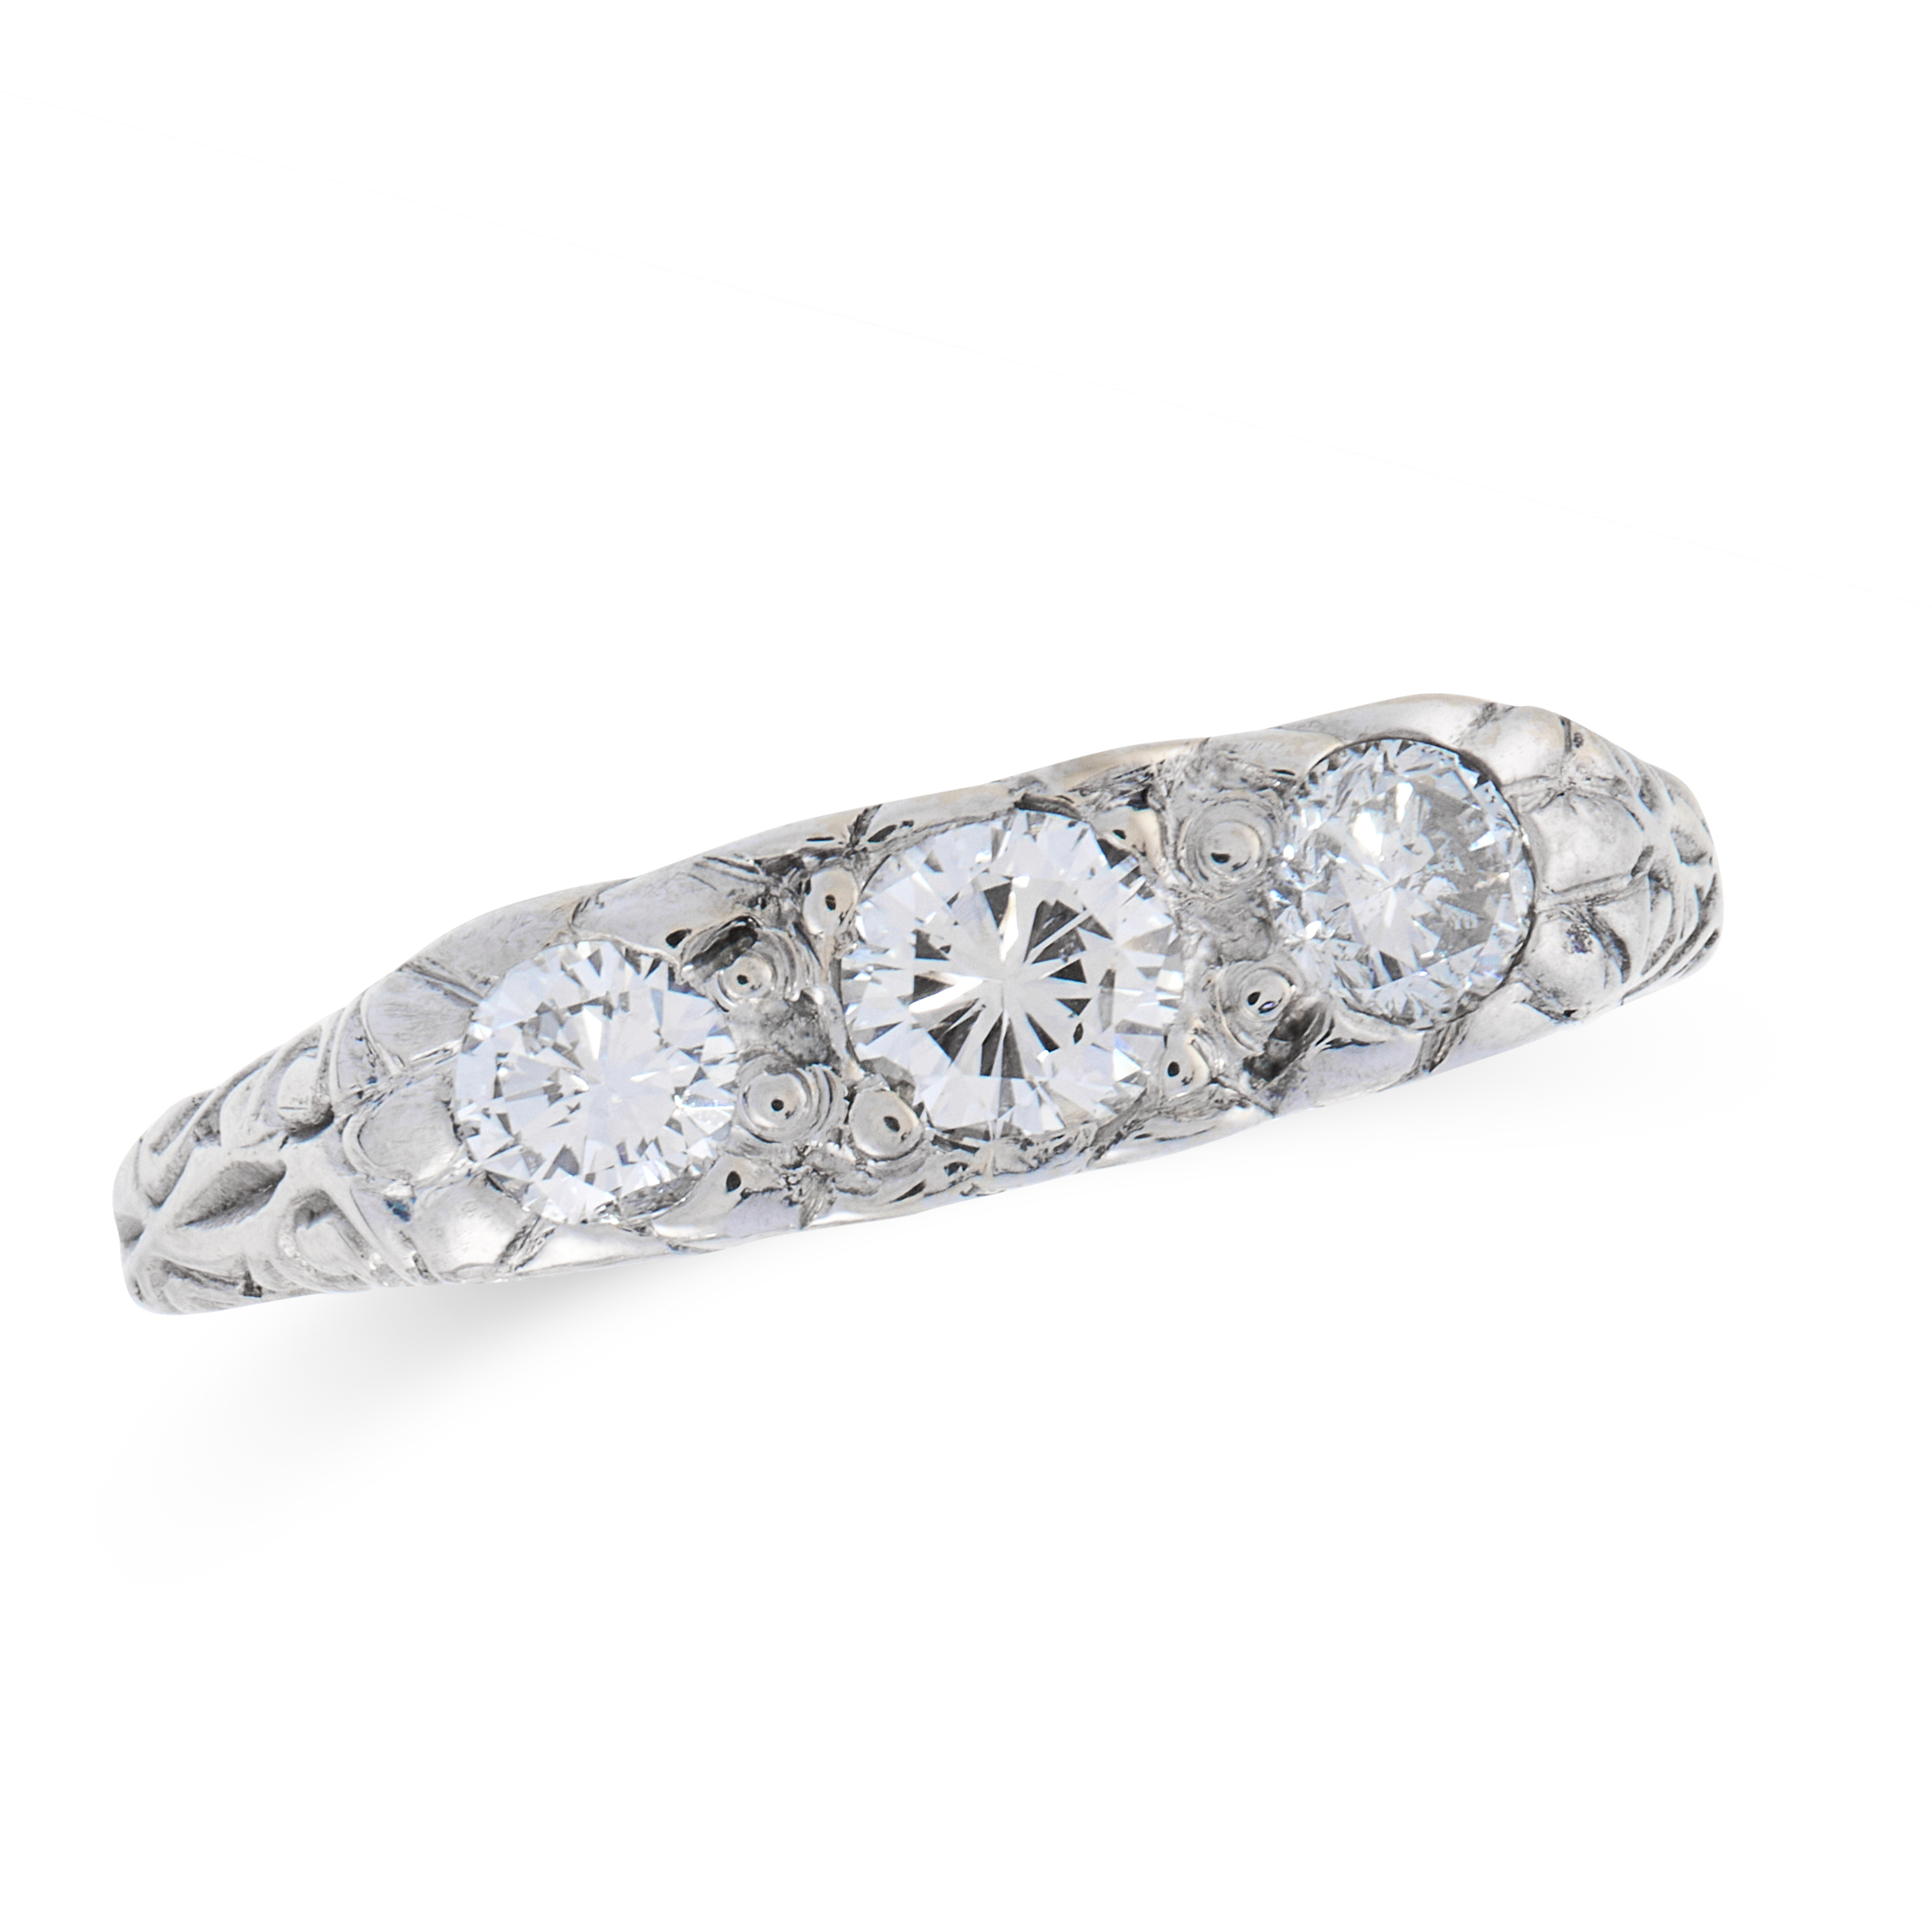 A DIAMOND THREE STONE DRESS RING set with a trio of graduated round cut diamonds, with scrolling